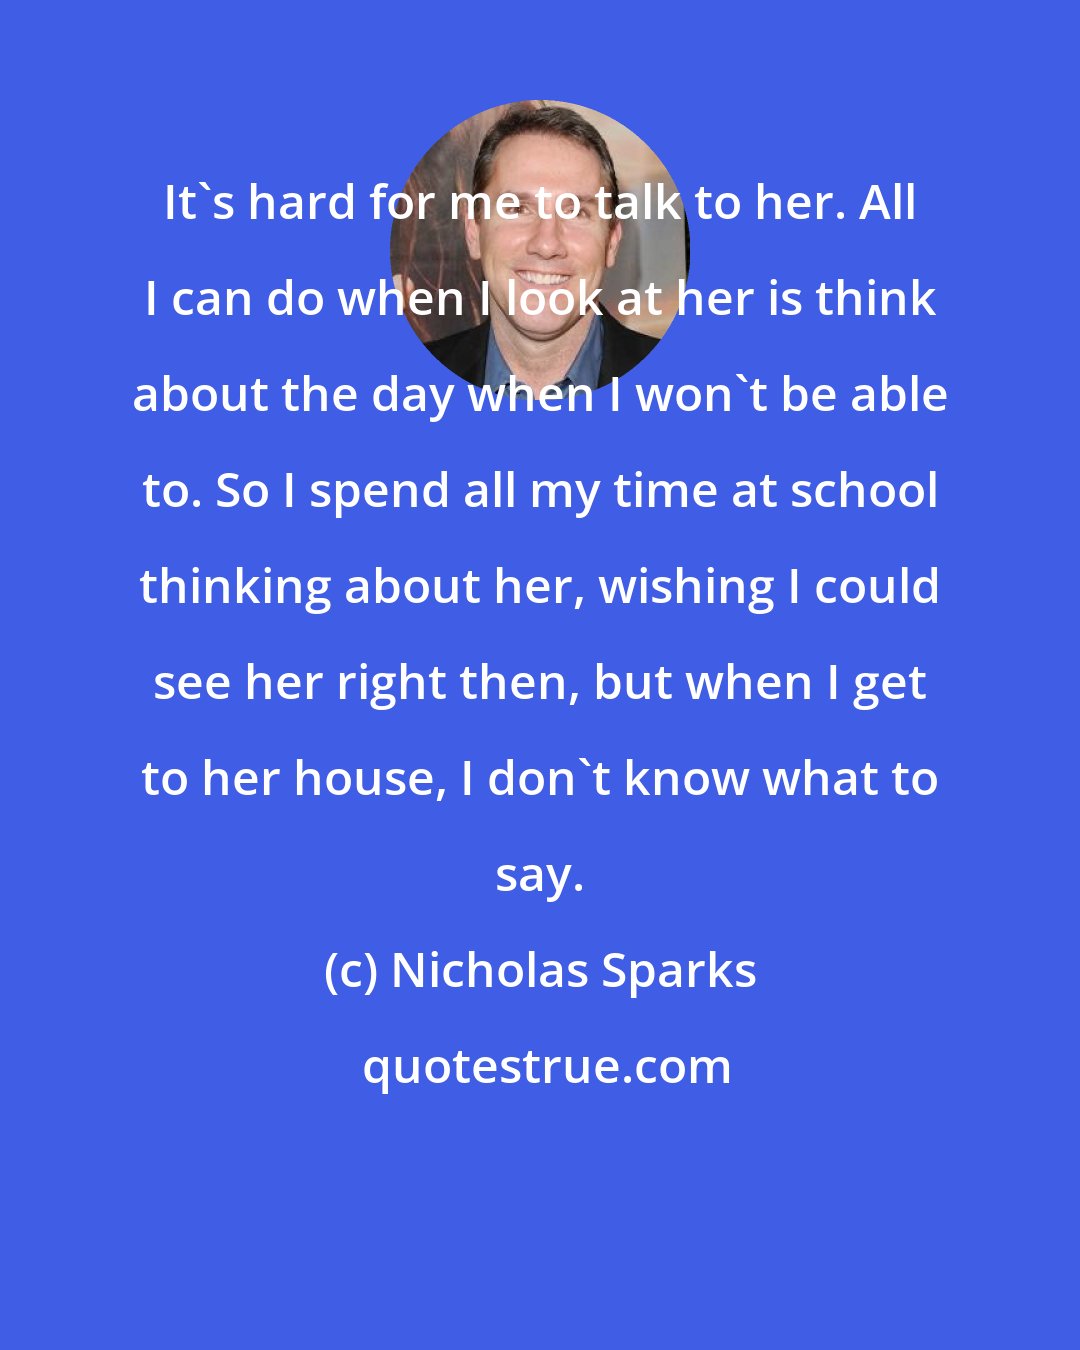 Nicholas Sparks: It's hard for me to talk to her. All I can do when I look at her is think about the day when I won't be able to. So I spend all my time at school thinking about her, wishing I could see her right then, but when I get to her house, I don't know what to say.